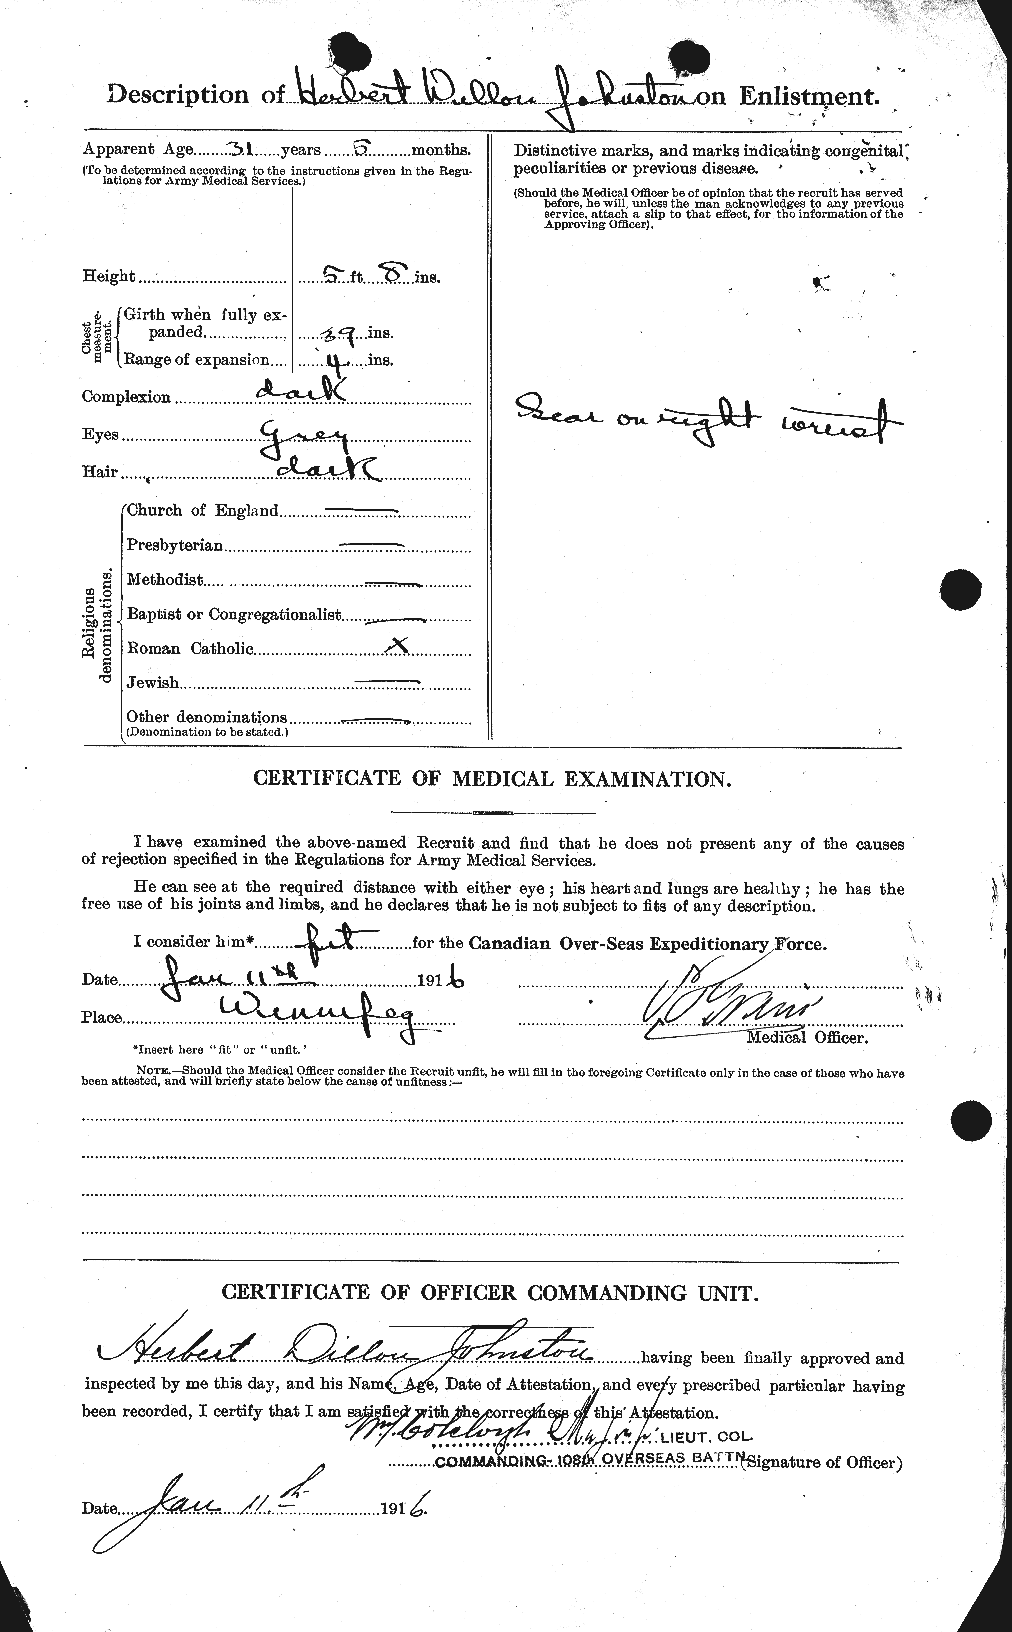 Personnel Records of the First World War - CEF 419554b